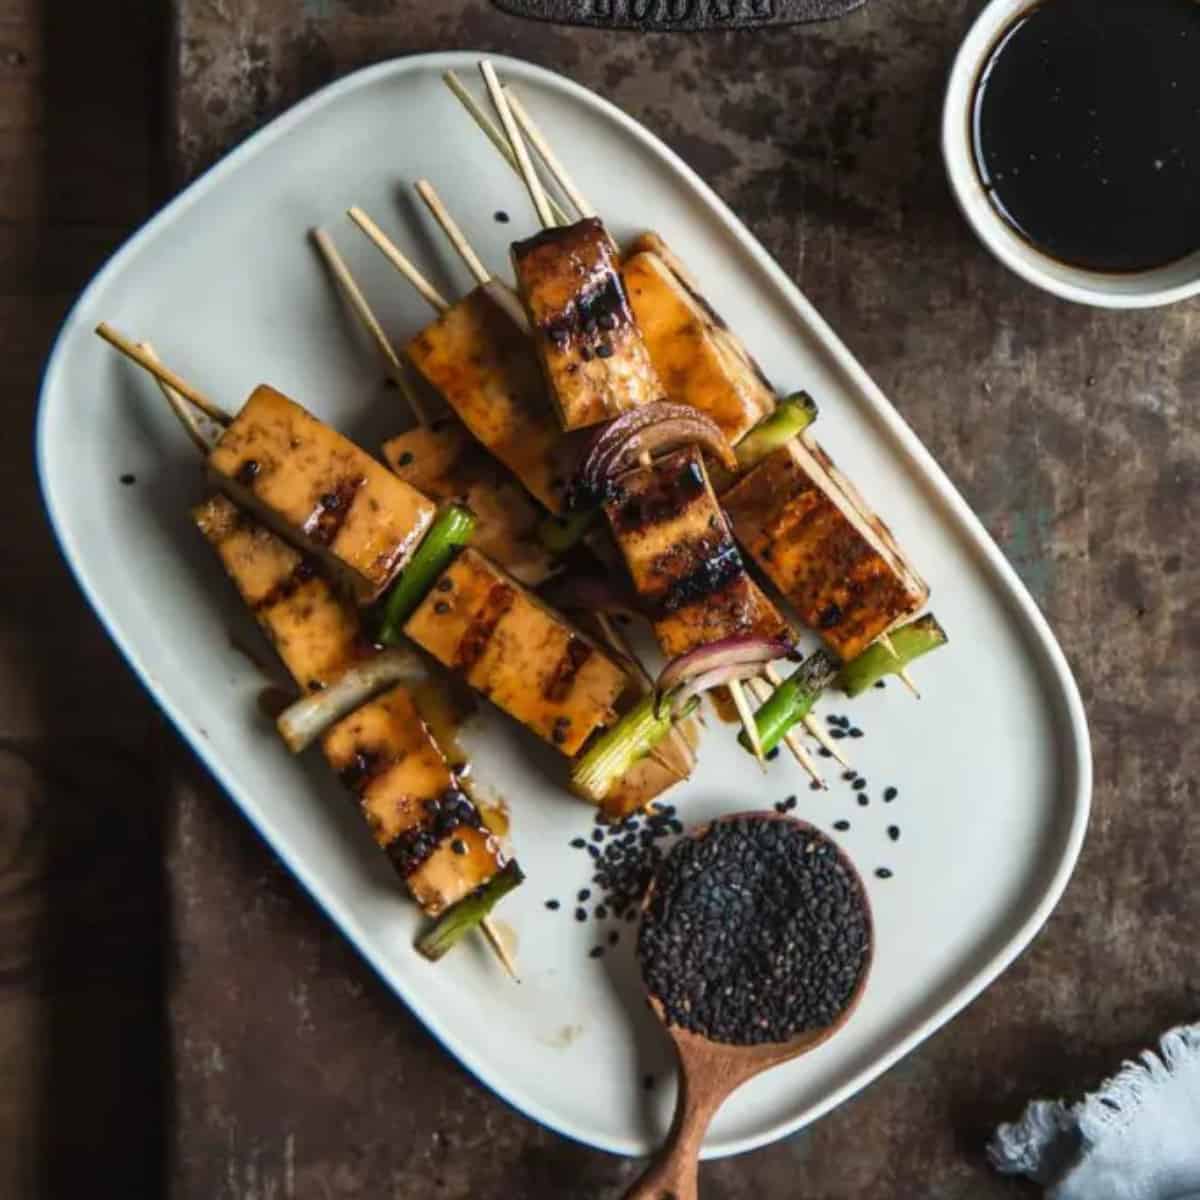 grilled skewers of tofu onions and asparagus with black sesame seeeds.